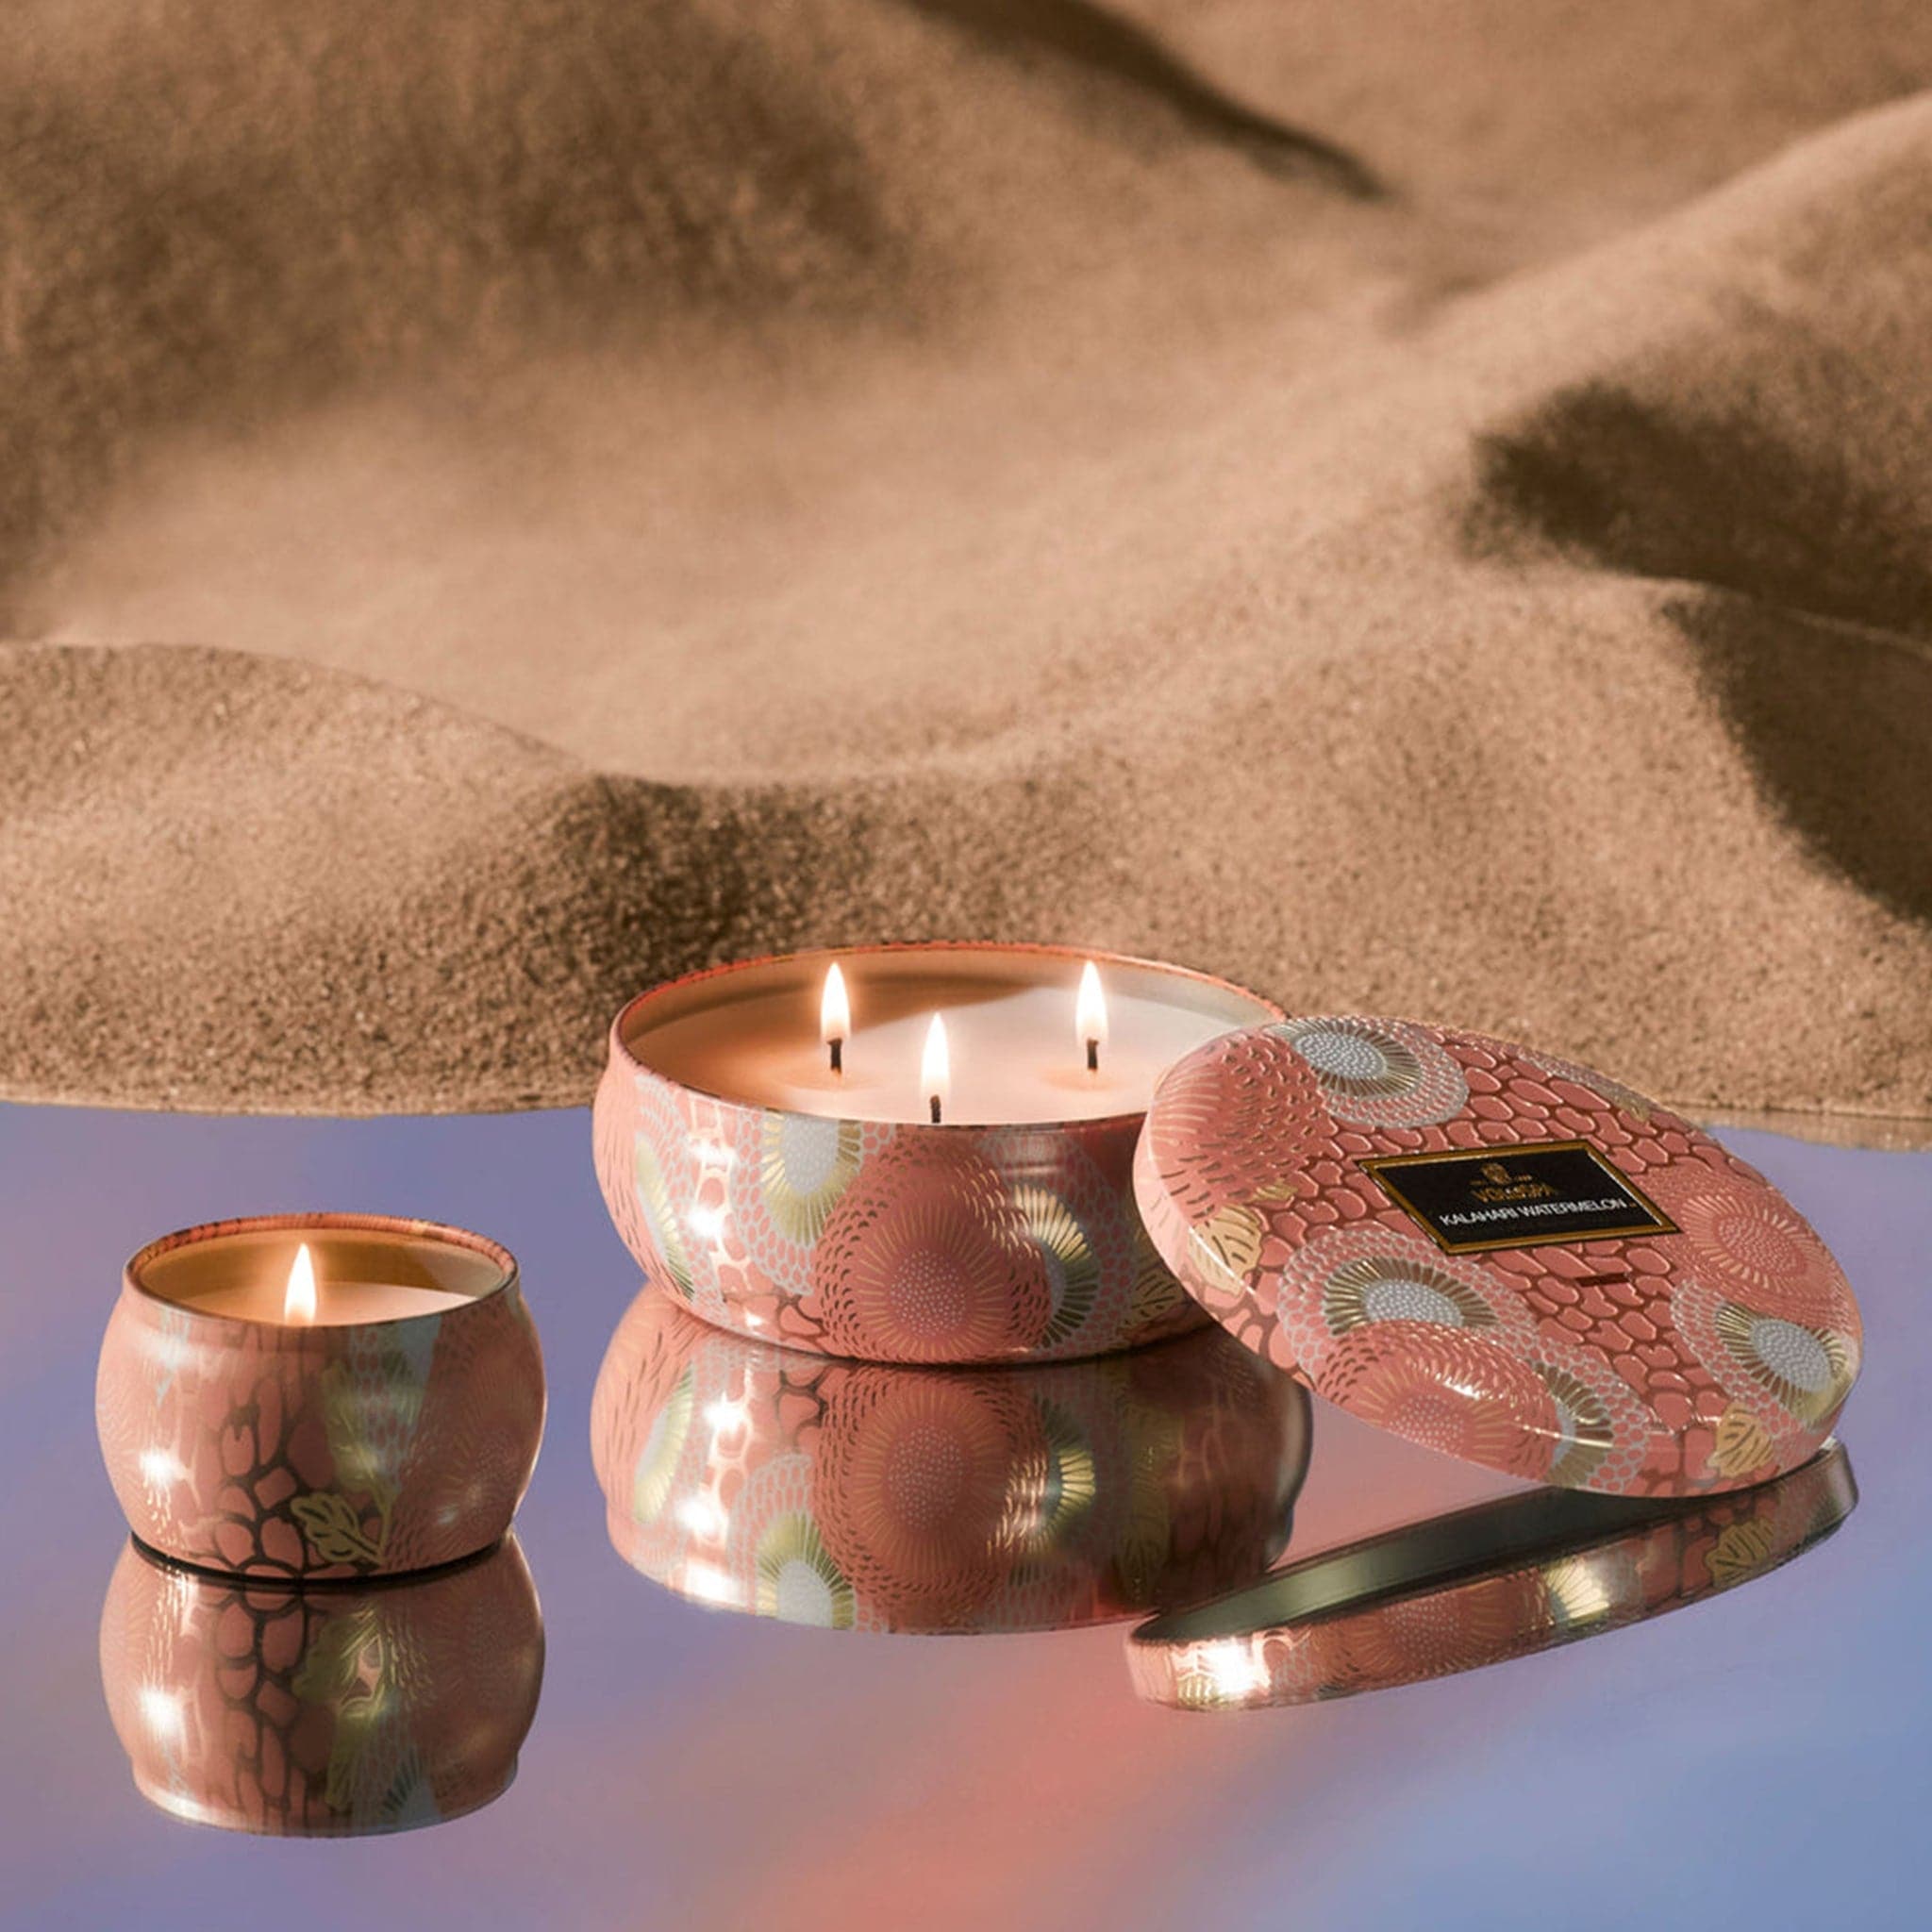 The Kalahari collection shown together with the mini tin and 3-wick tin. Its colors are beautiful and the jar&#39;s tin distributes light in a romantic way. Edit alt text